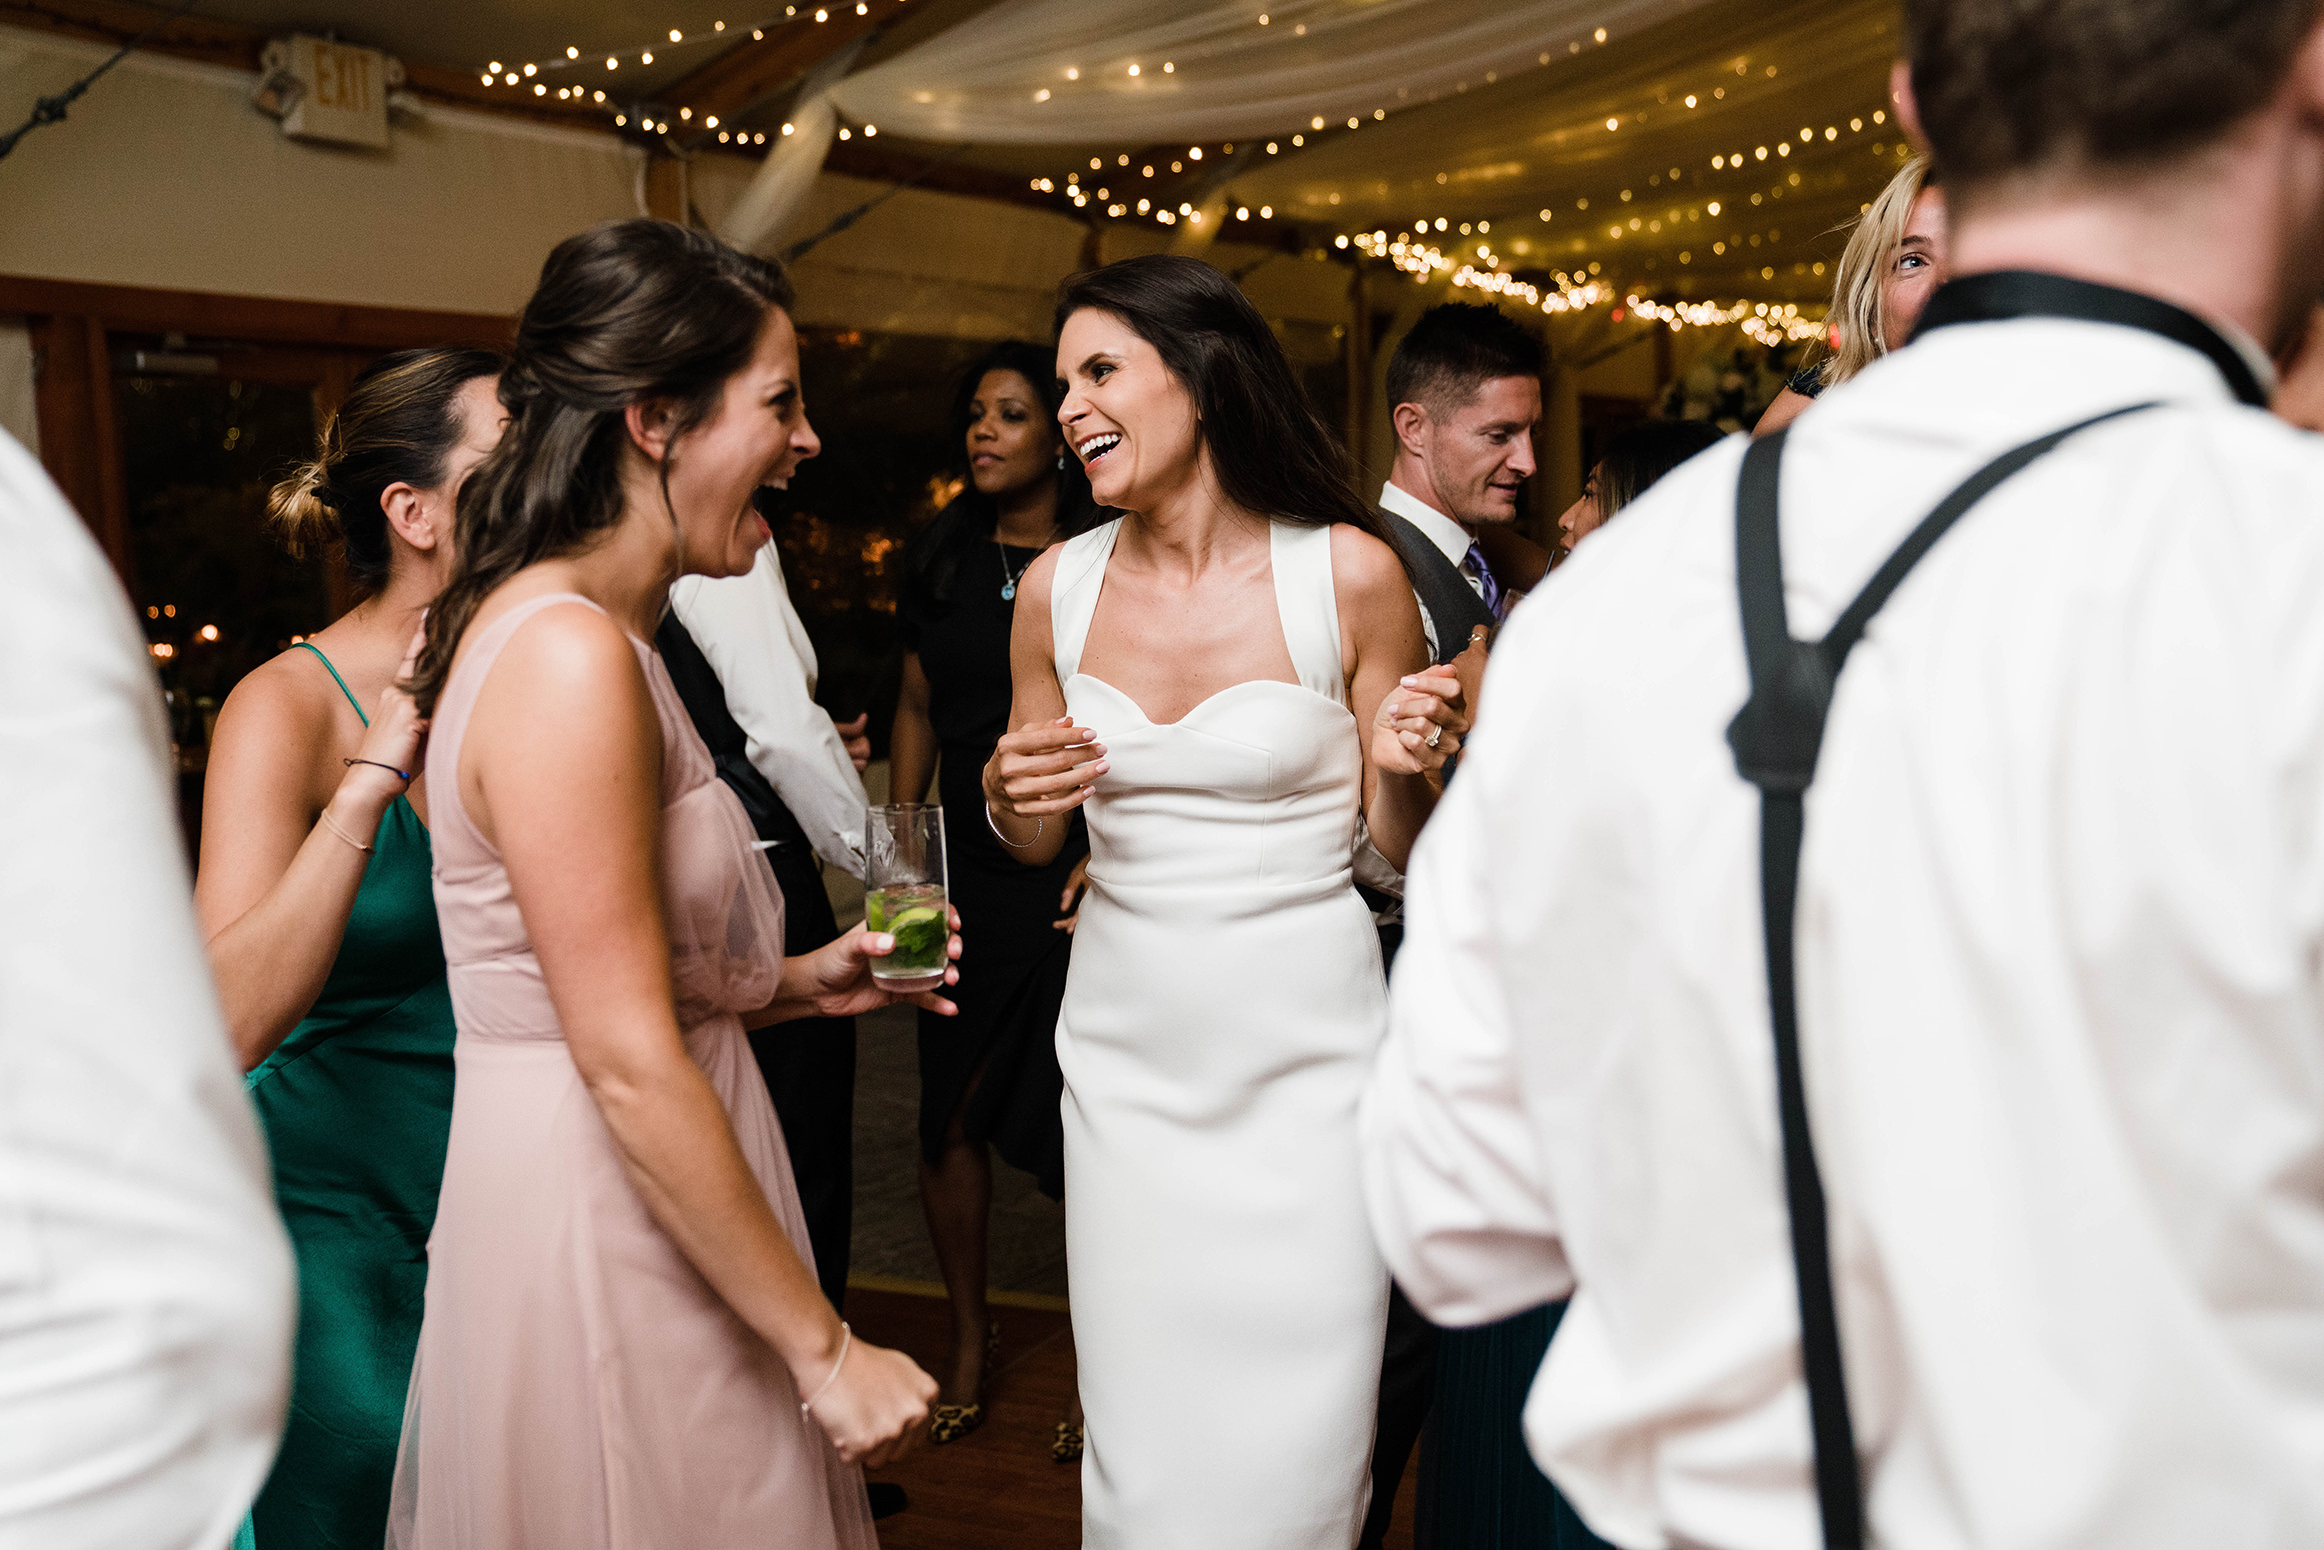 A documentary photograph featured in the best of wedding photography of 2019 showing a bride dancing with friends